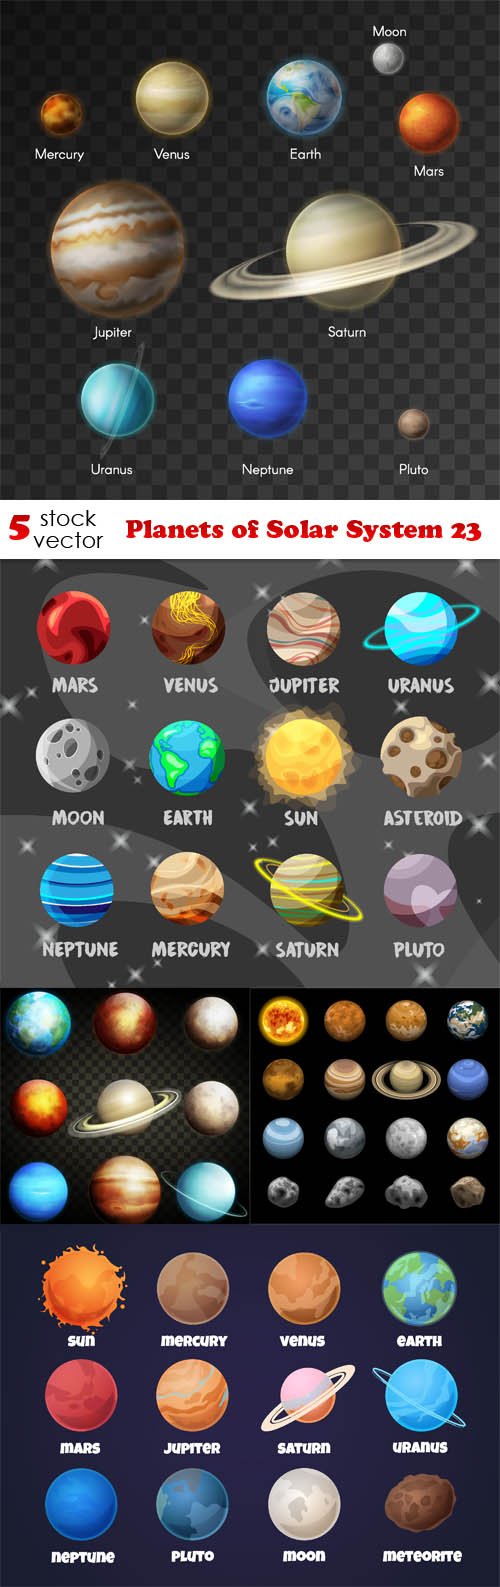 Vectors - Planets of Solar System 23